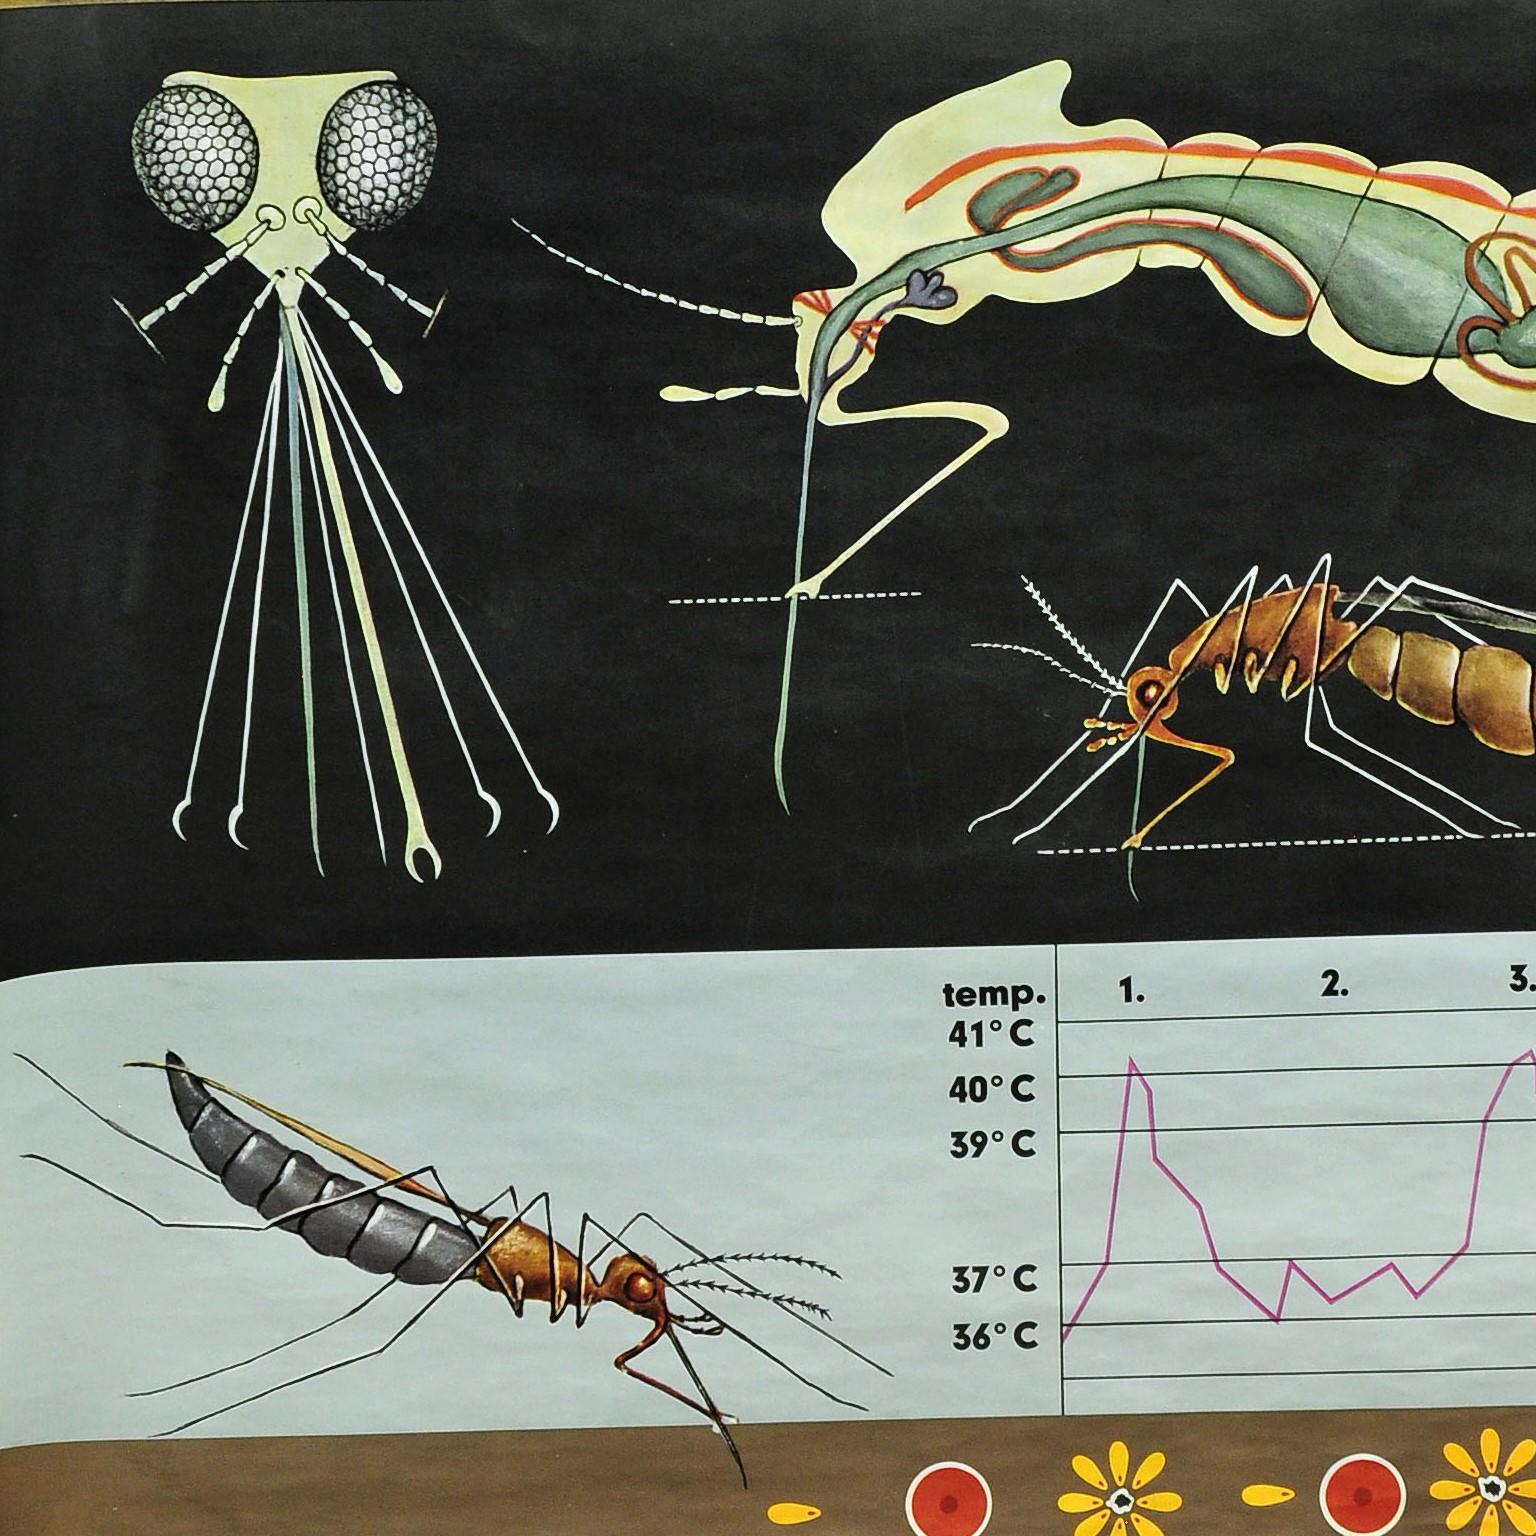 Country Naturalistic Art Print by Jung Koch Quentell Mosquito Midges Insect Wall Chart For Sale